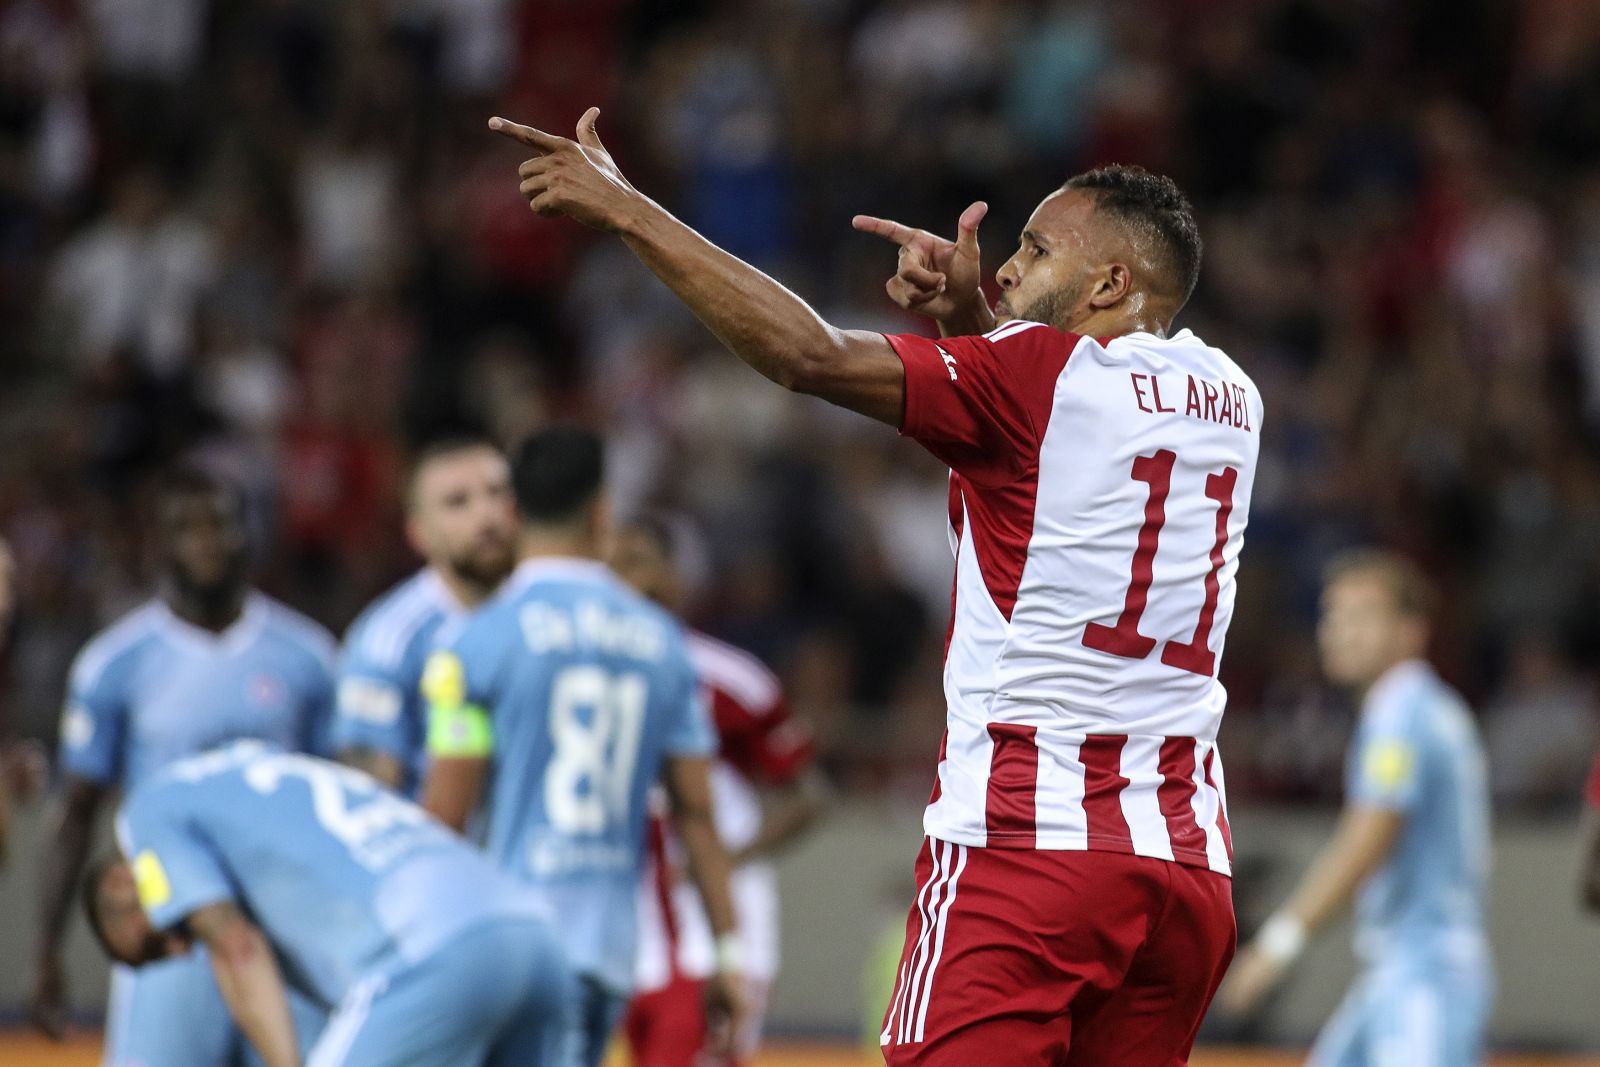 epa10106427 Olympiacos' Youssef El-Arabi reacts after scoring the equaliser 1-1 during the UEFA Europa League third qualifying round, 1st leg soccer match between Olympiacos Piraeus and Slovan Bratislava in Piraeus, Greece, 4 August 2022.  EPA/PANAGIOTIS MOSCHANDREOU